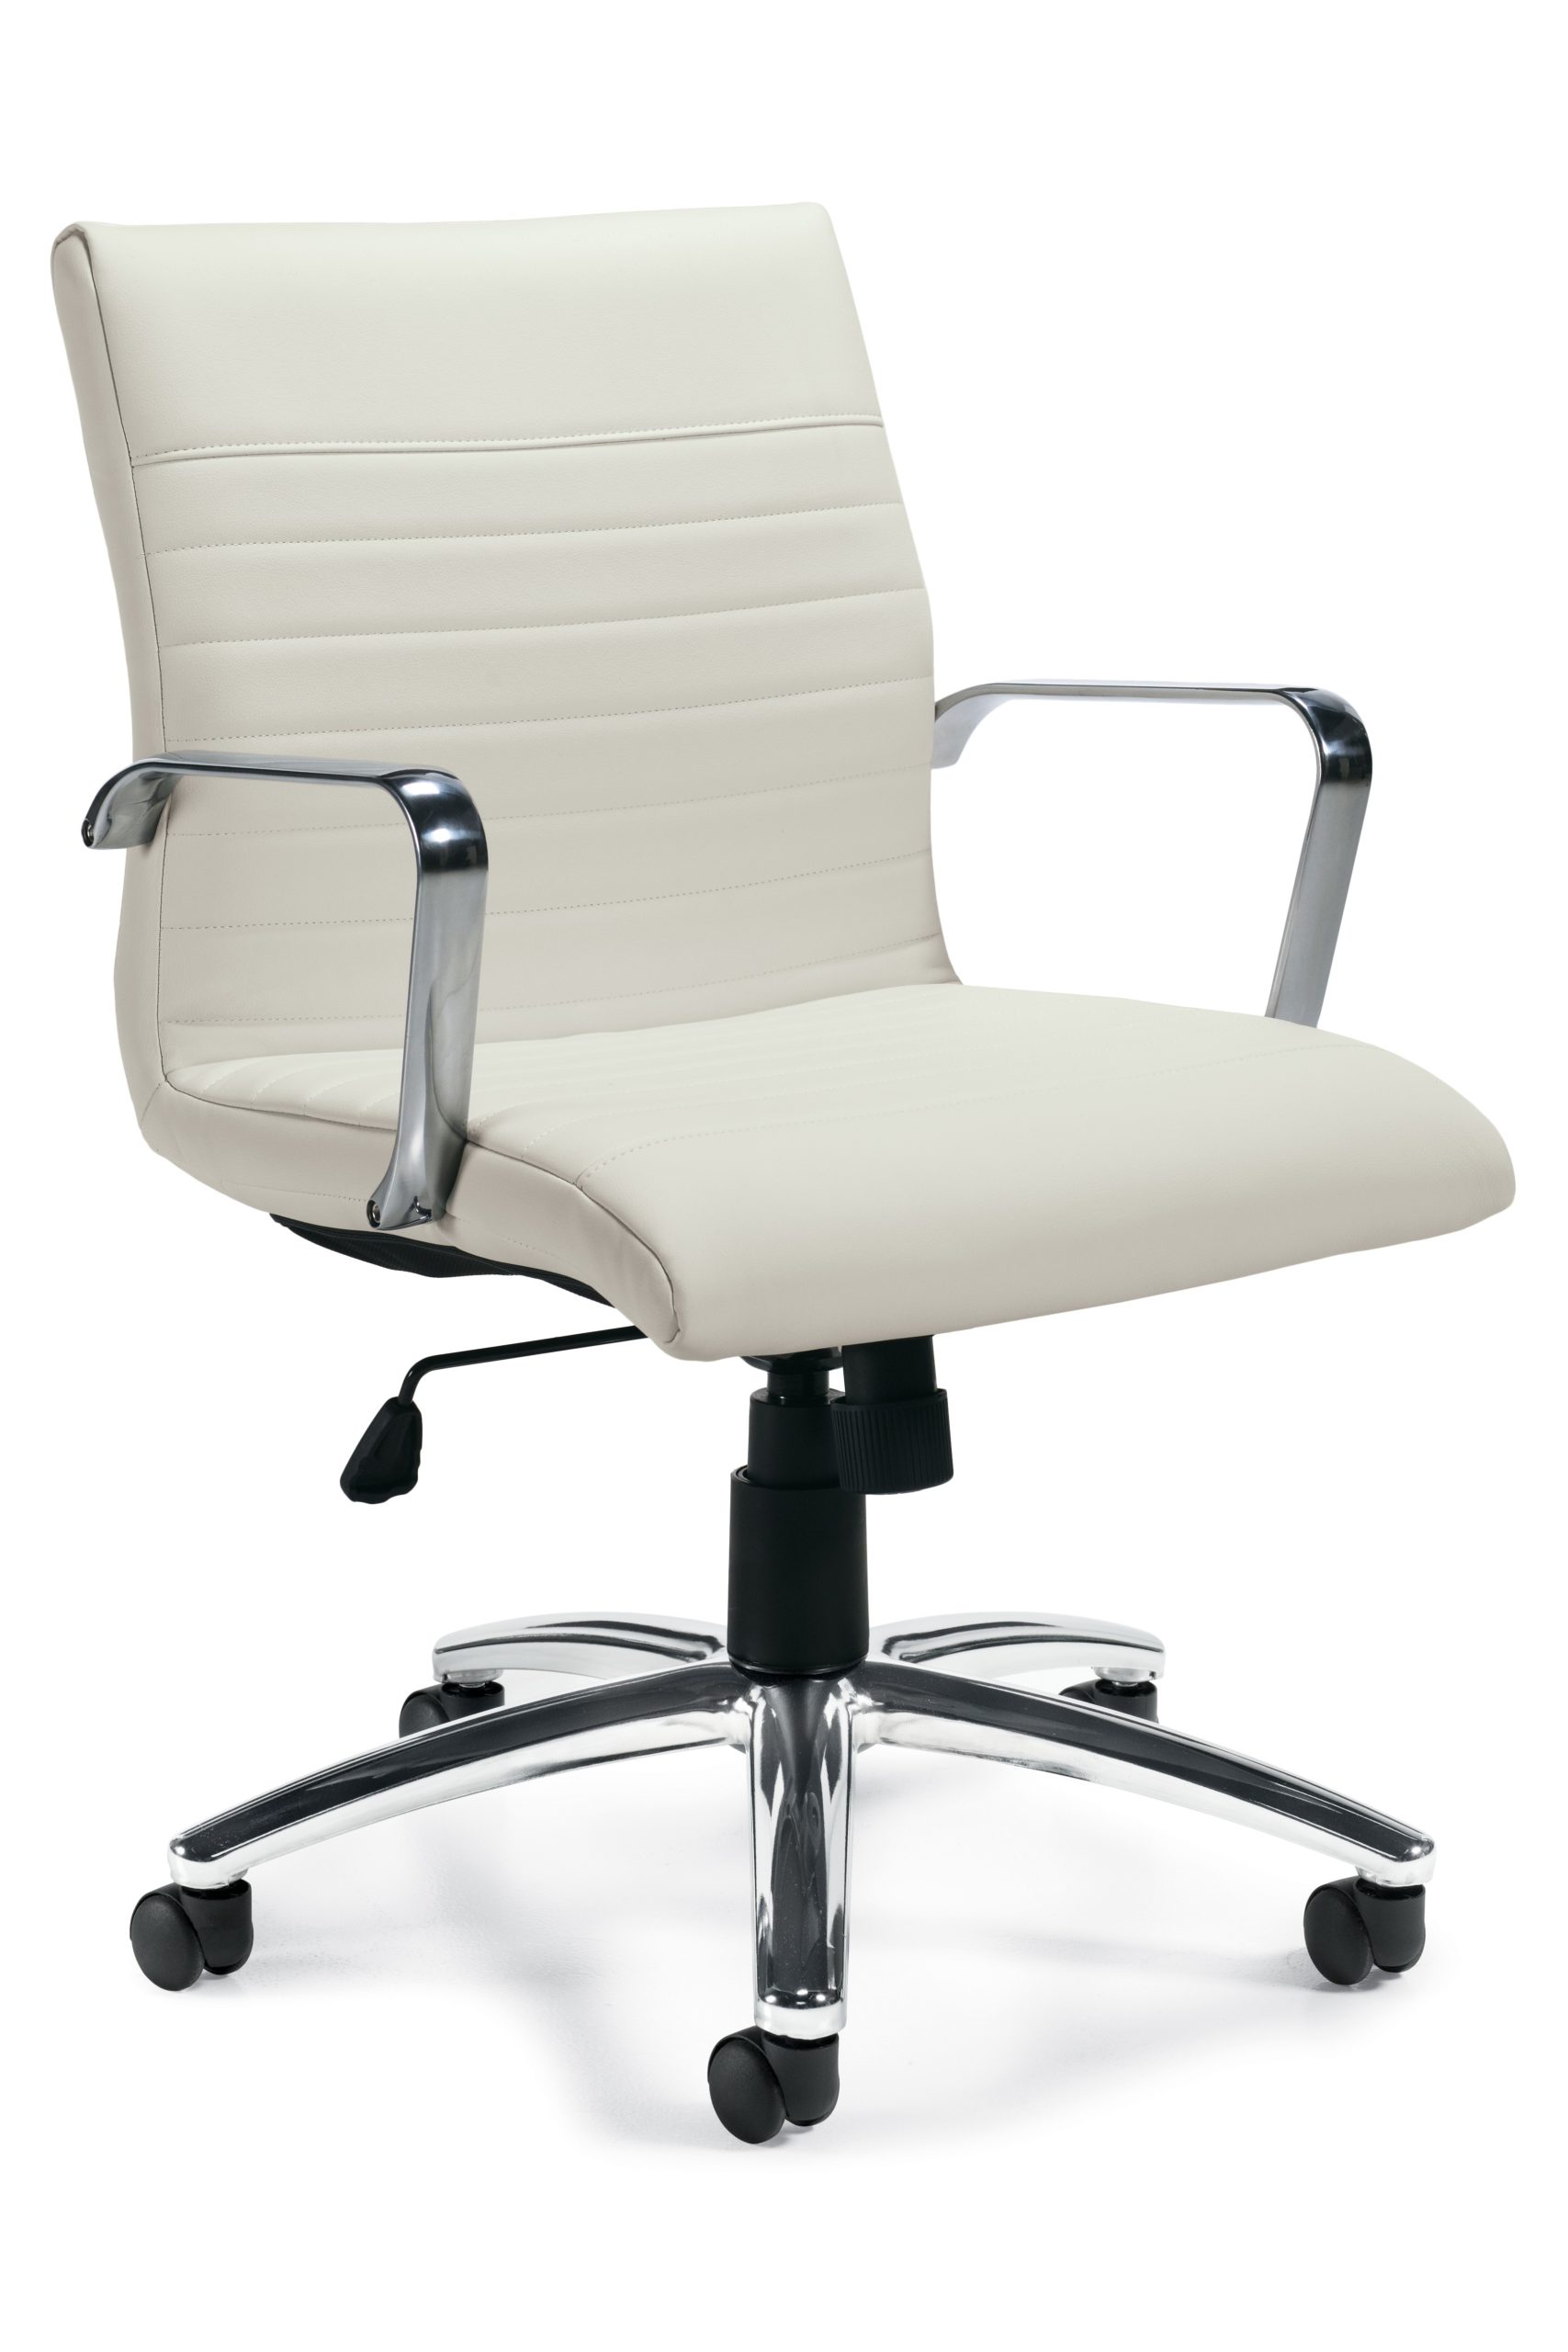 White Luxhide midback designer conference chair, swivel-tilt with chrome loop arms, polished aluminum 5-star base, adjustable tilt tension, and horizontal stitching detail.